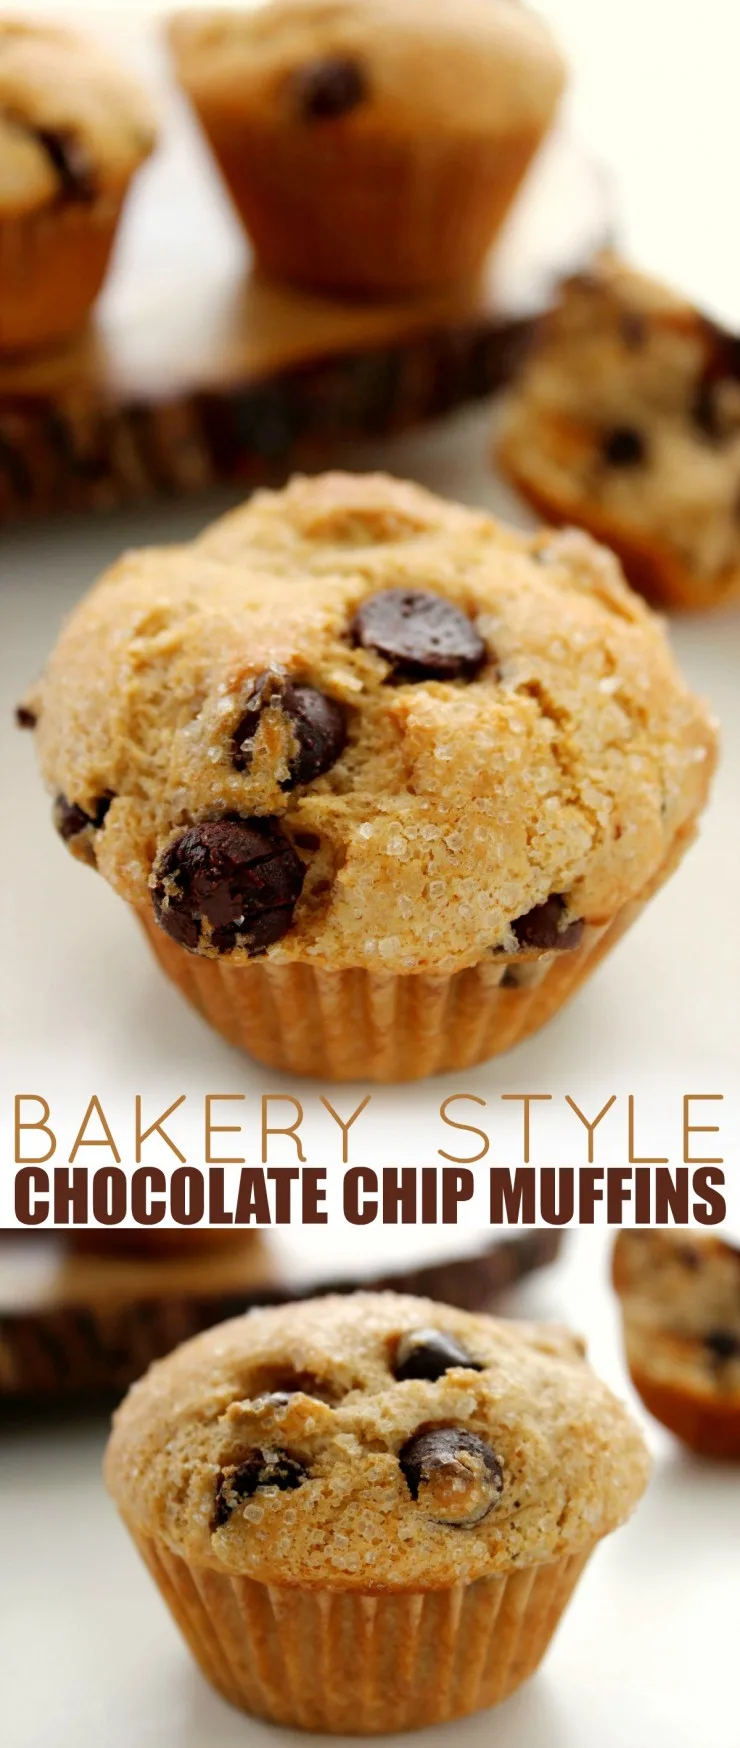 Try these Bakery Style Chocolate Chip Muffins with a mug of hot coffee for a delicious breakfast on the go!